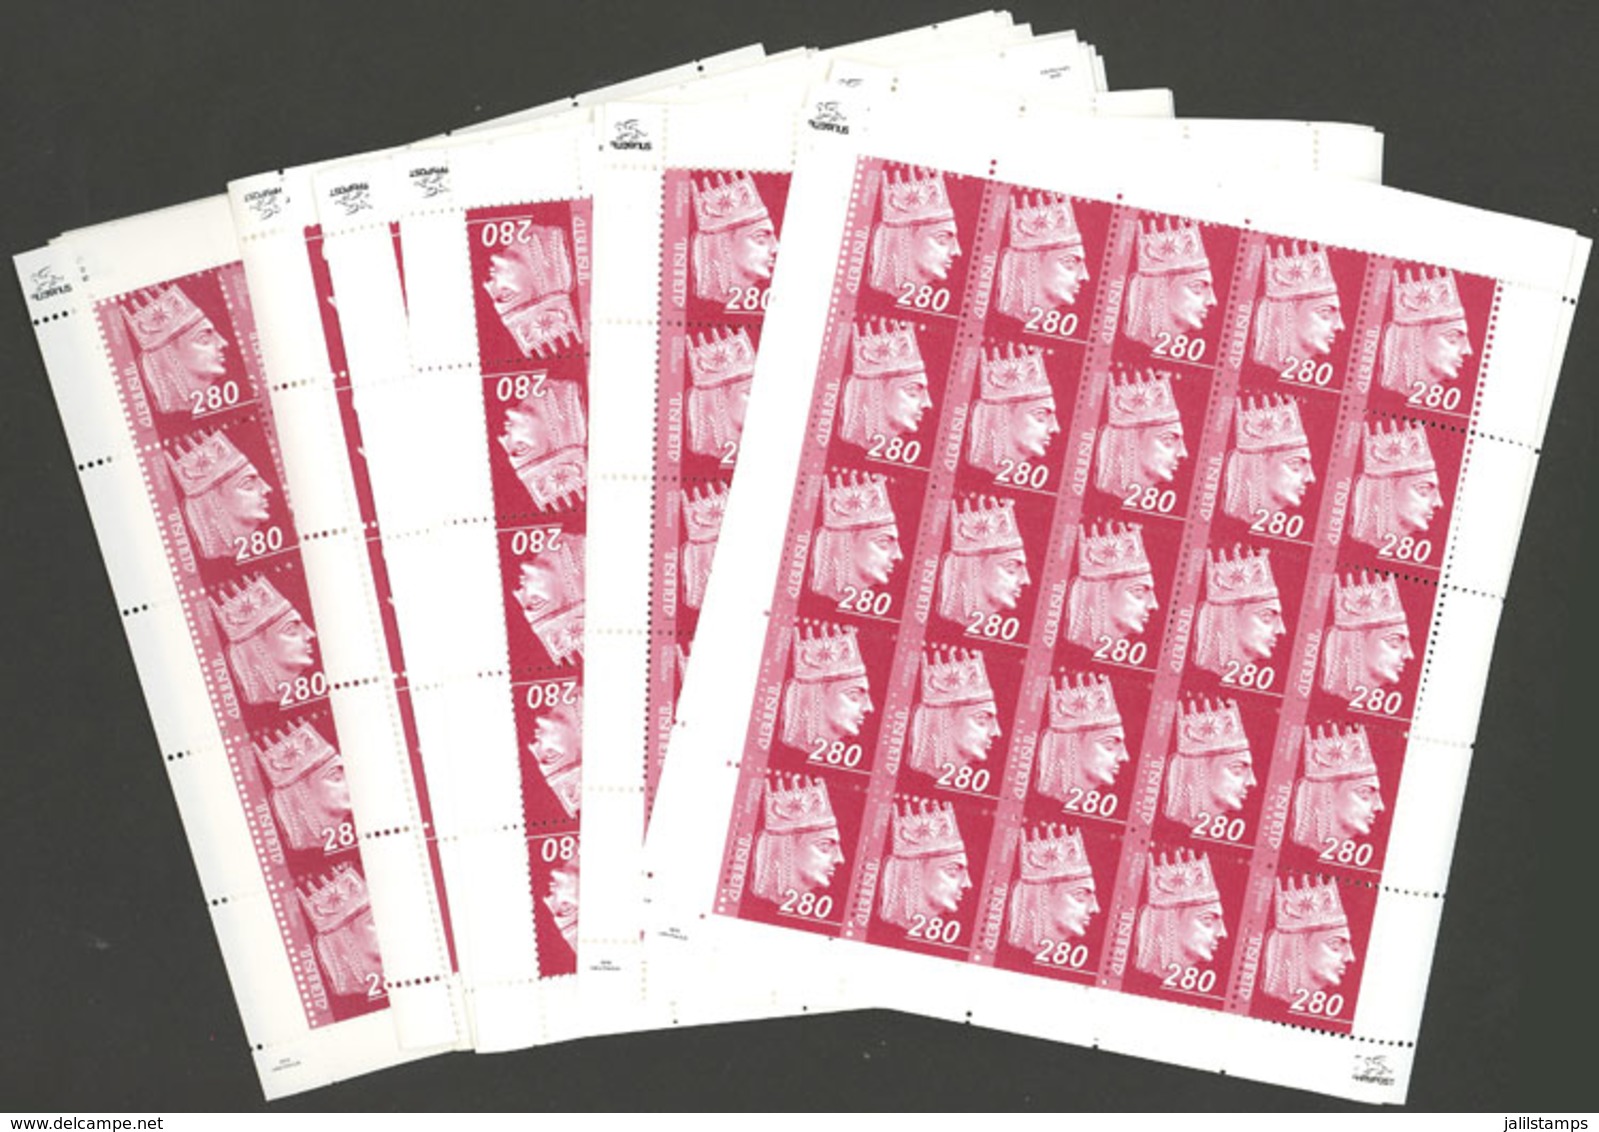 ARMENIA: Sc.827, 2010 280d. King Tigran The Great, 50 Sheets Of 25 Stamps Each (in Total 1,250 Stamps), MNH - Armenien